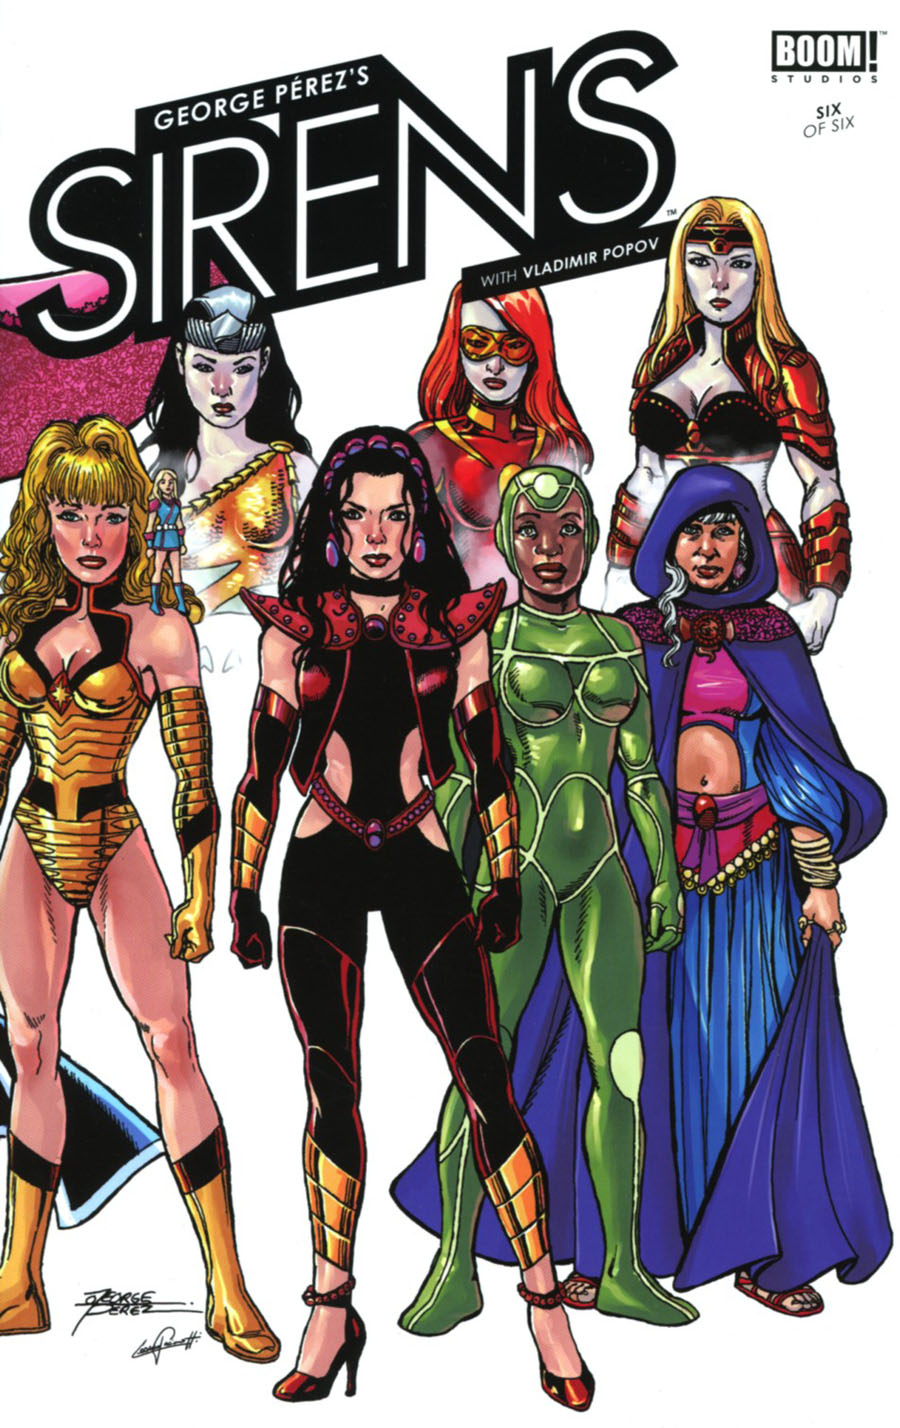 George Perezs Sirens #6 Cover A Regular George Perez Cover